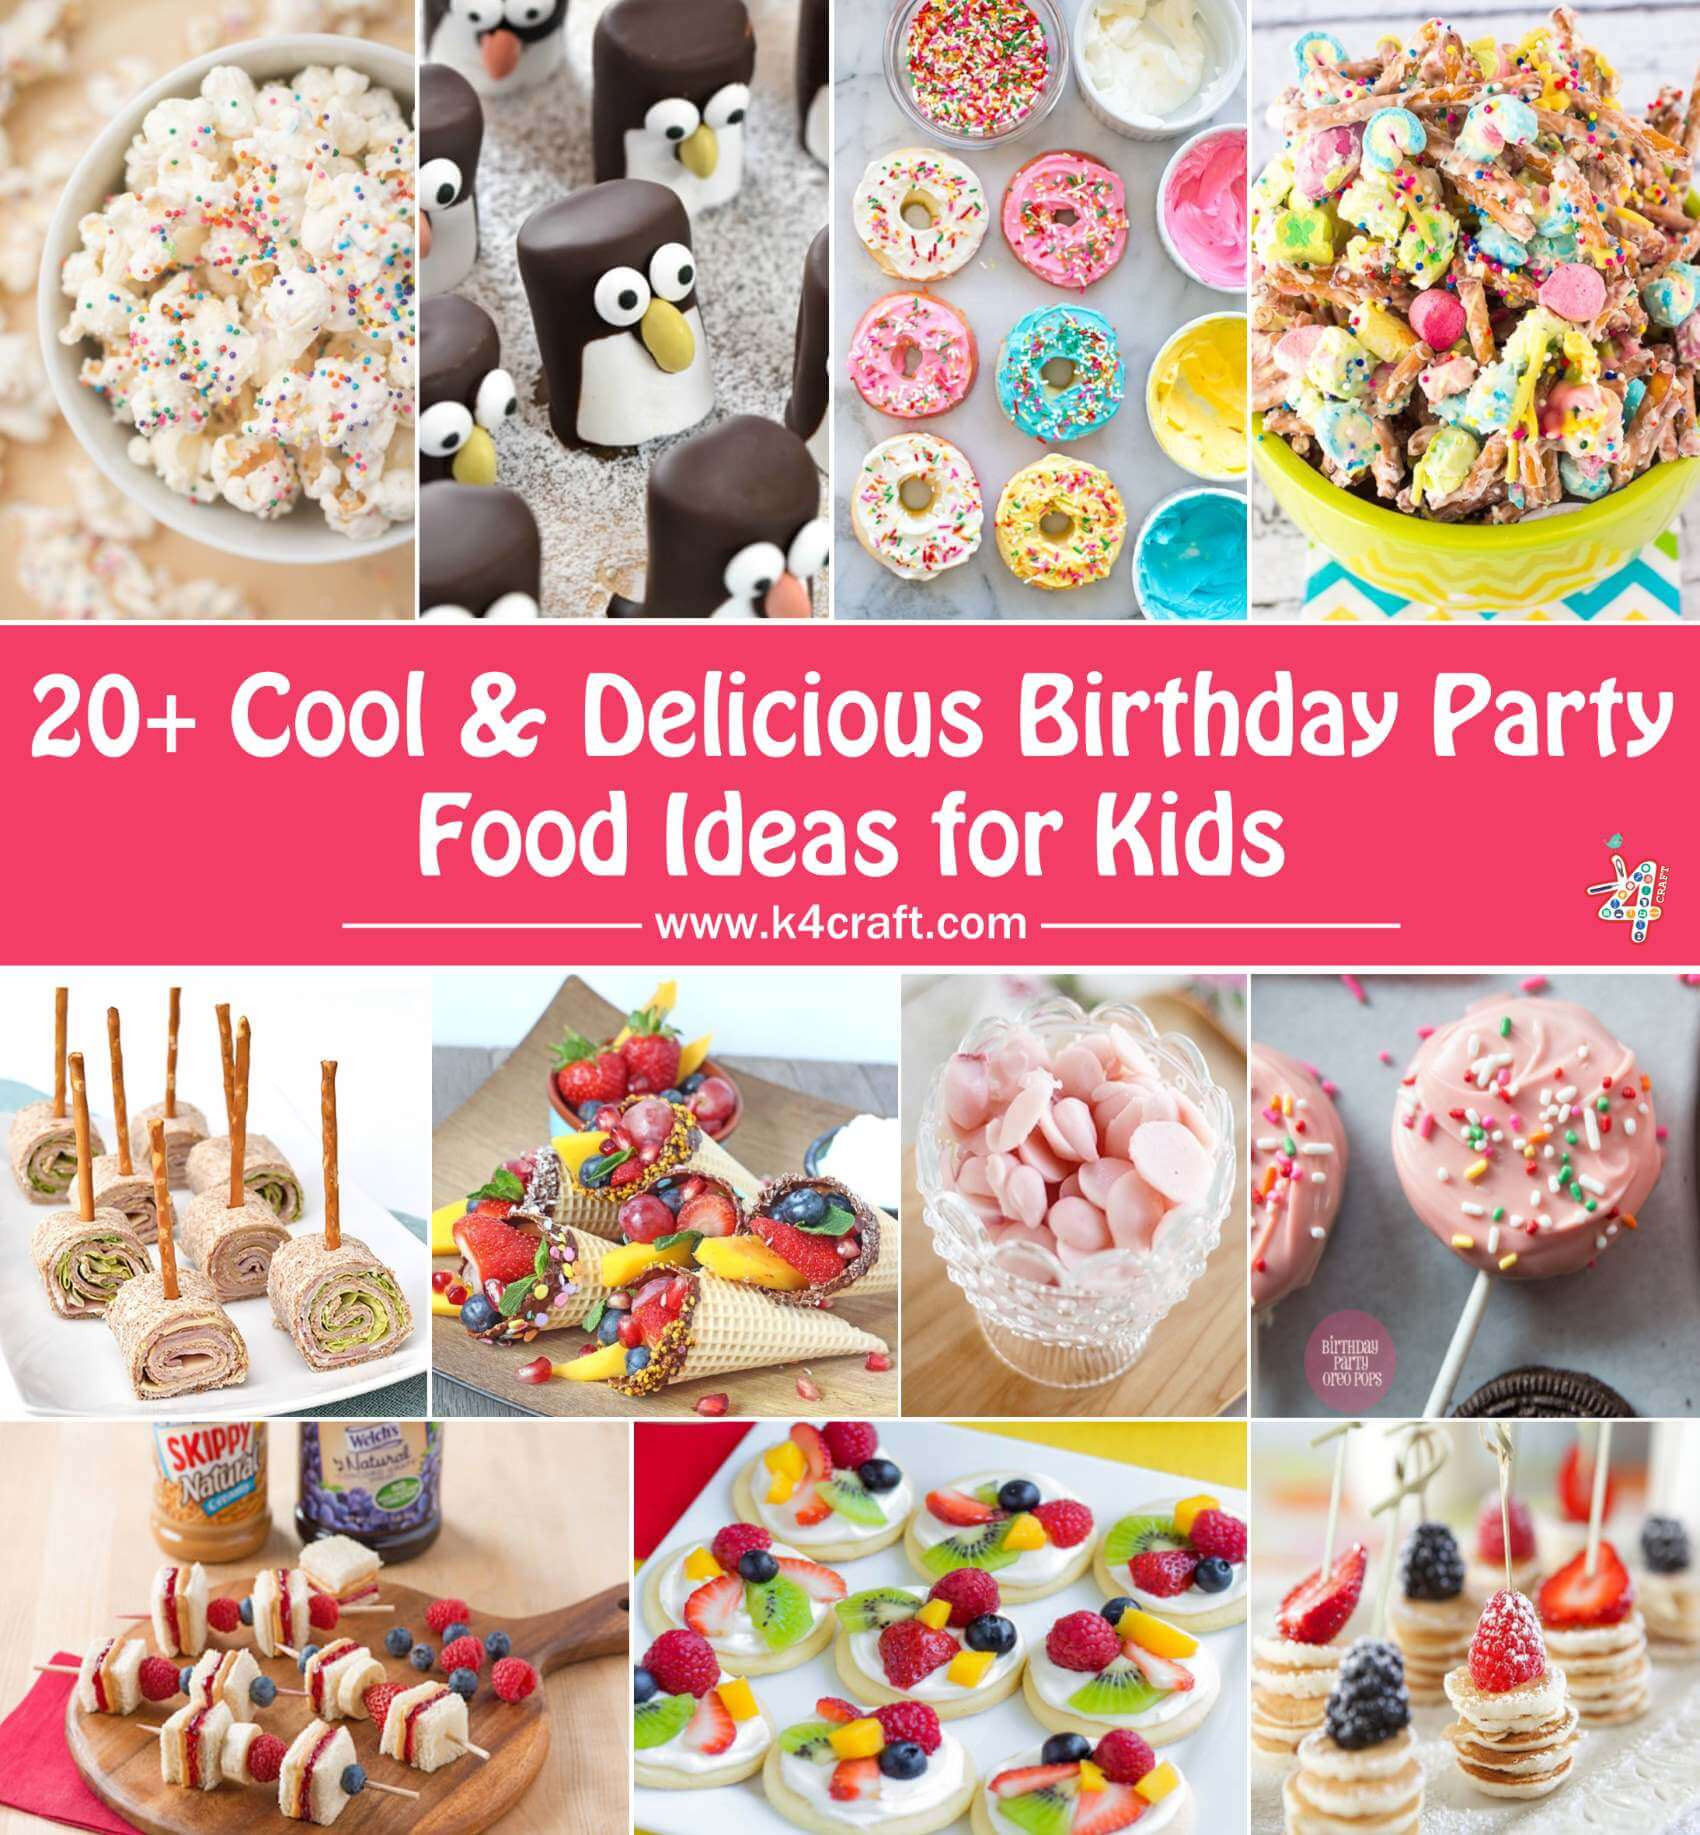 Birthday Party Food Ideas
 Cool & Delicious Birthday Party Food Ideas for Kids • K4 Craft